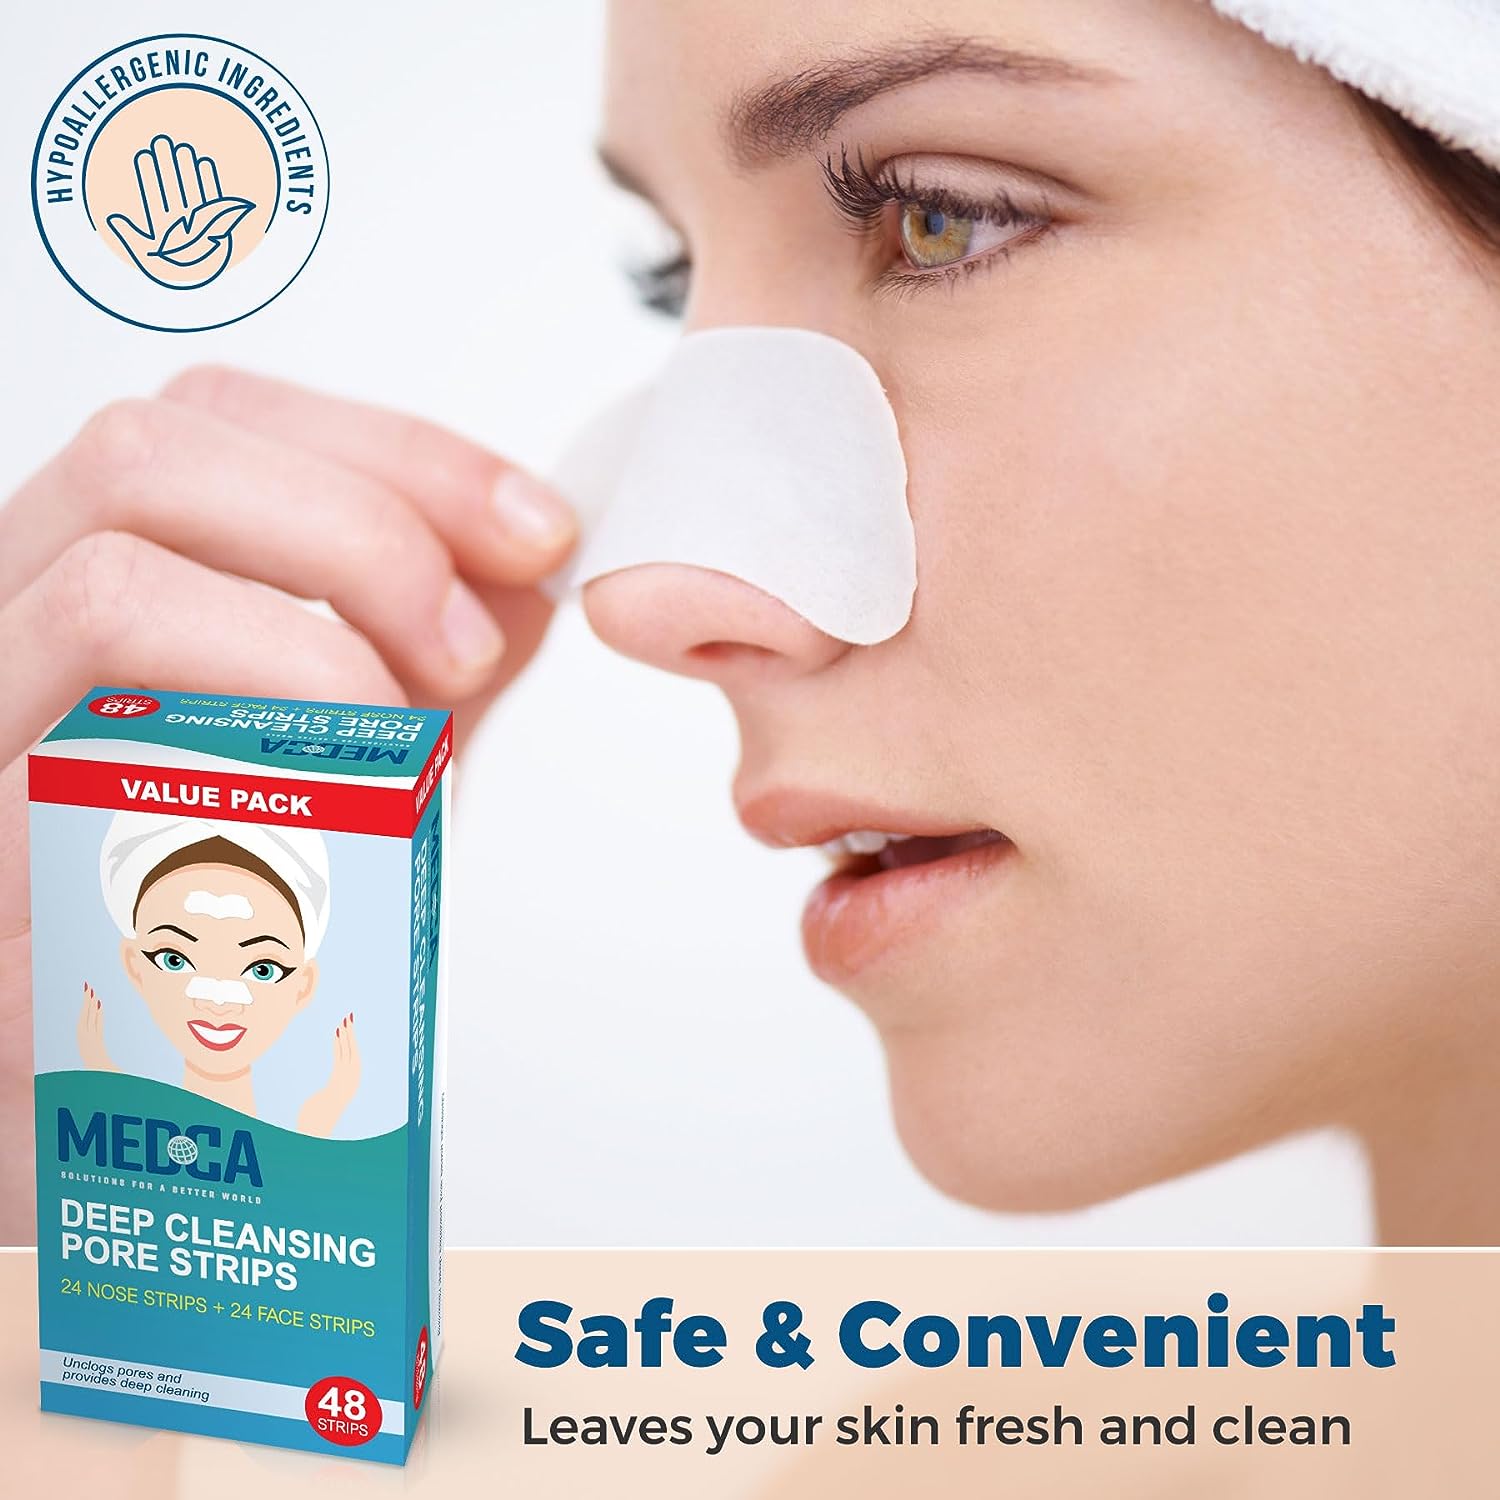 MEDca Deep Cleansing Pore Strips Combo Pack, 48 Count Strips Exfoliants & Scrubs - image 5 of 9